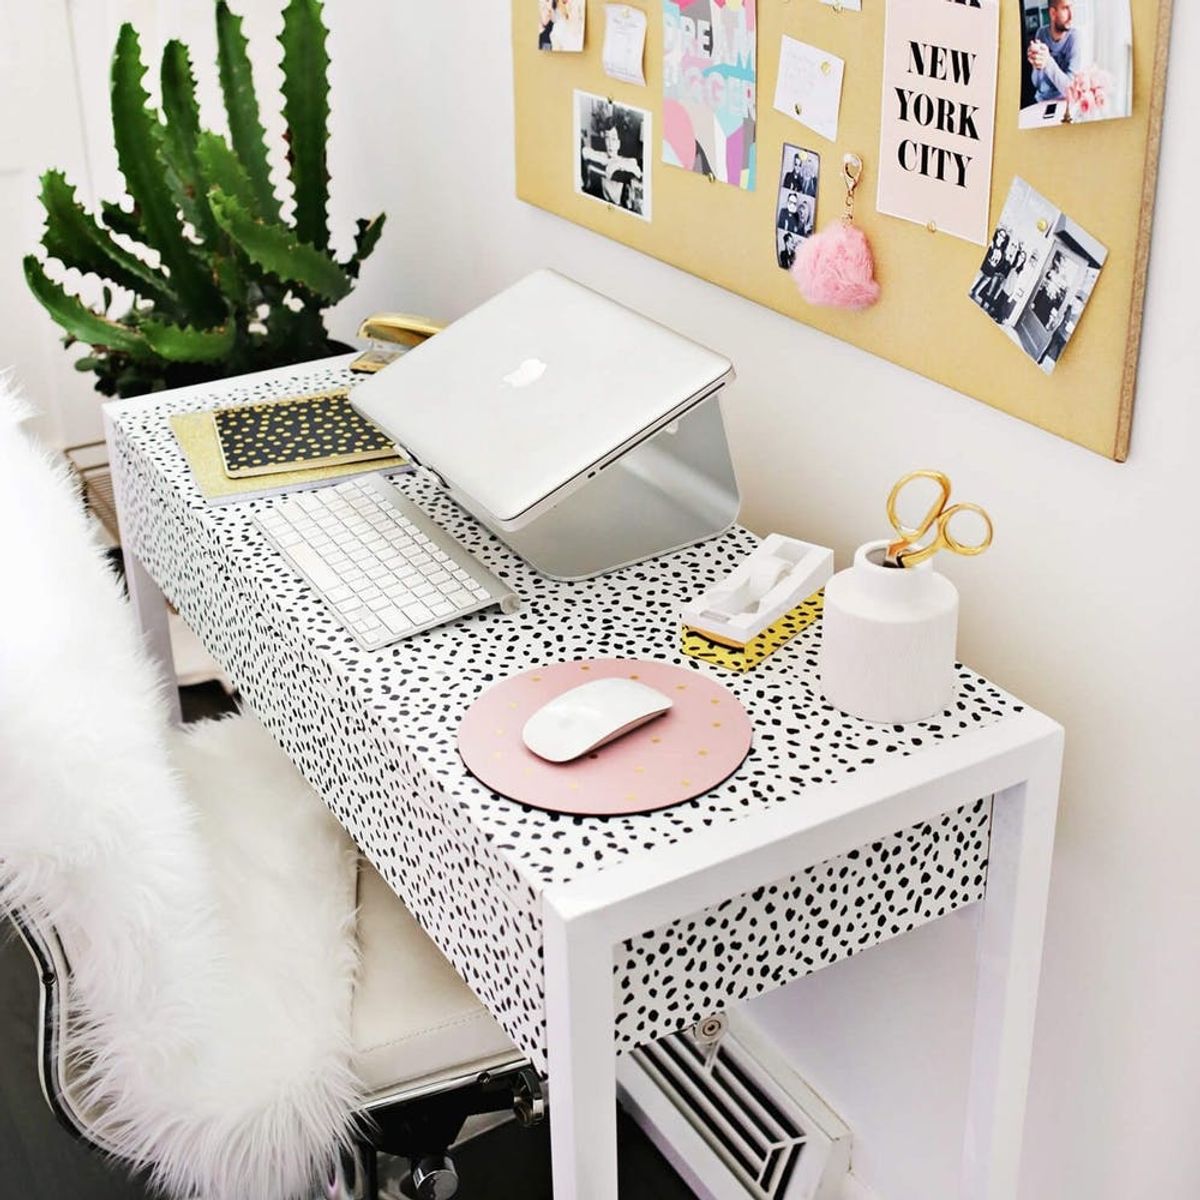 13 Kate Spade New York-Inspired Office Decor Ideas for the HBIC